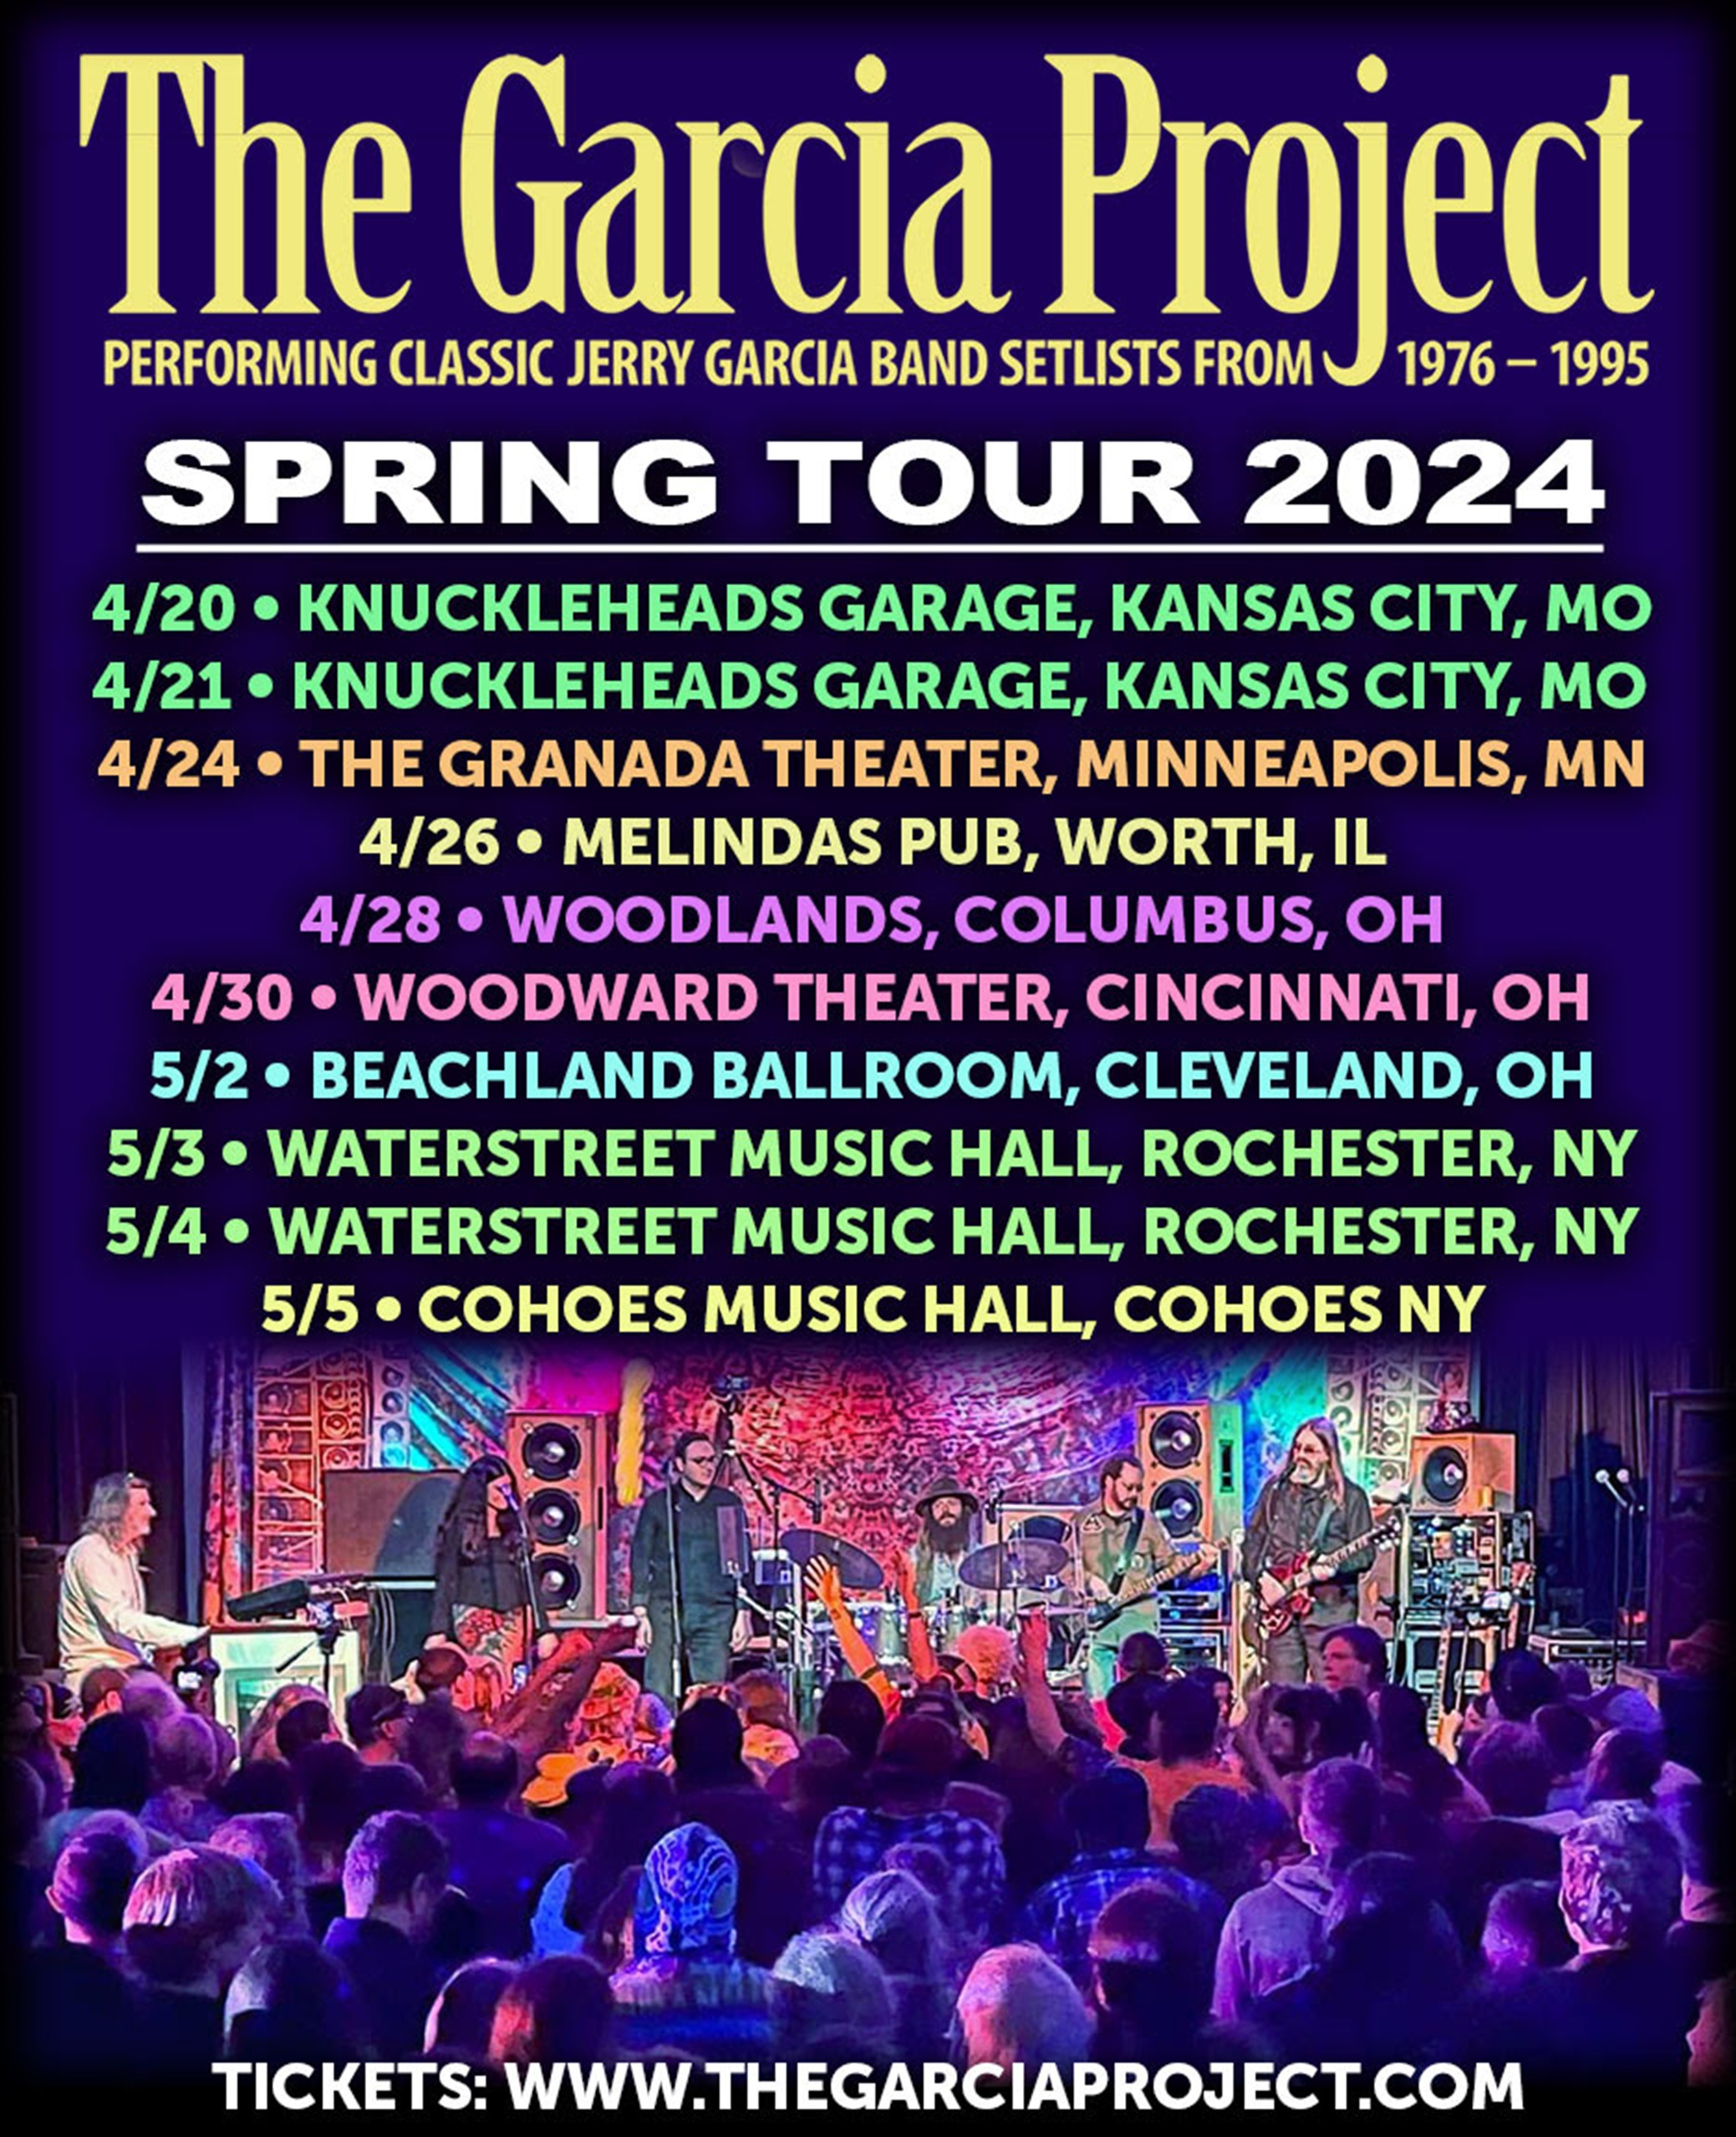 The Garcia Project 2024 Spring Tour Dates